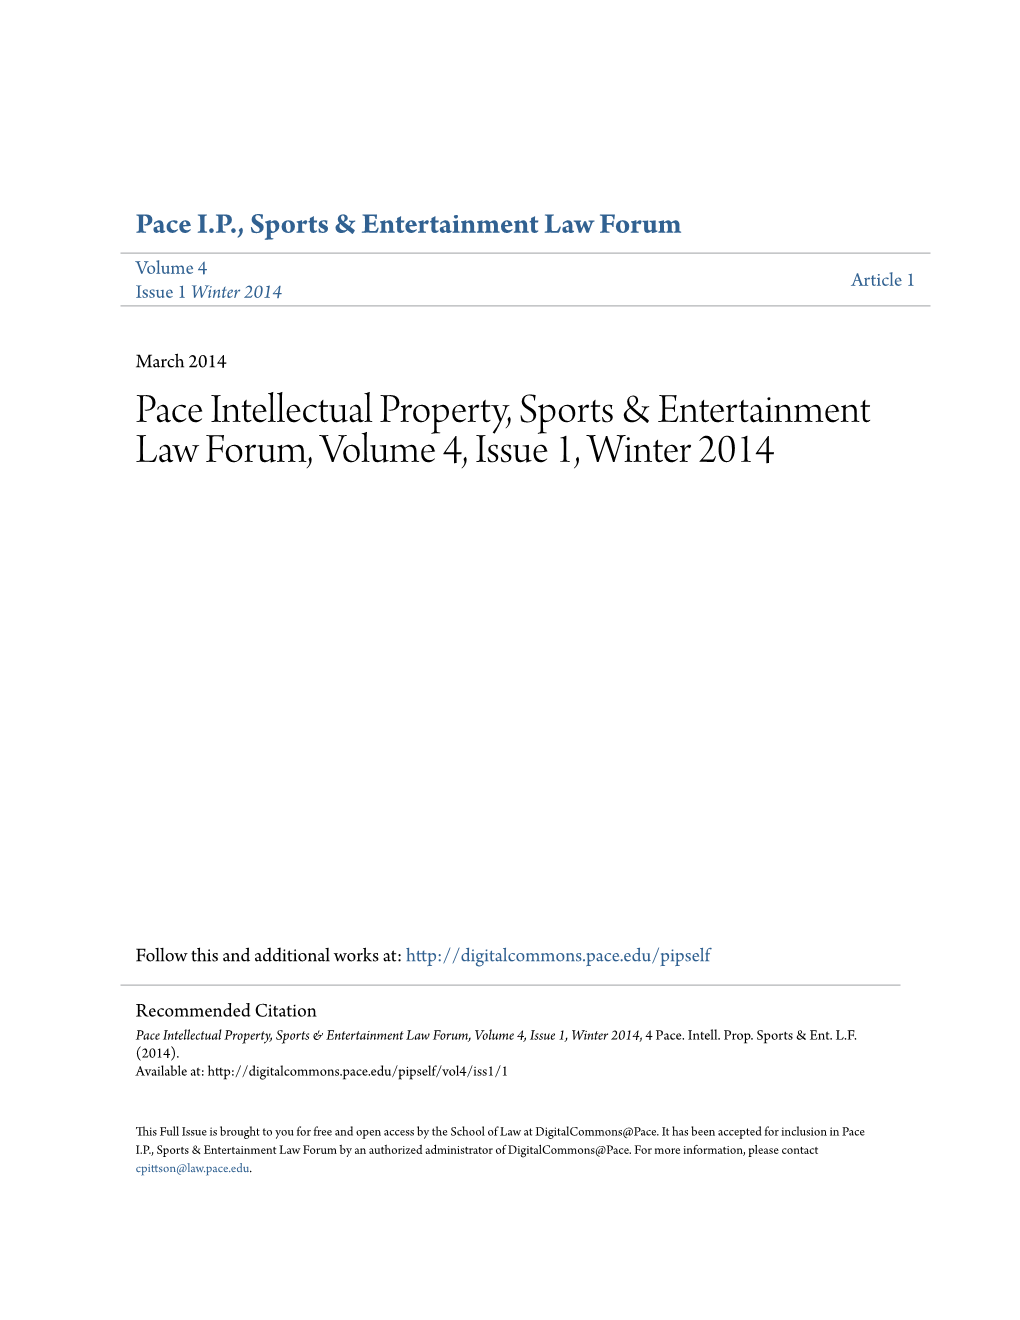 Pace Intellectual Property, Sports & Entertainment Law